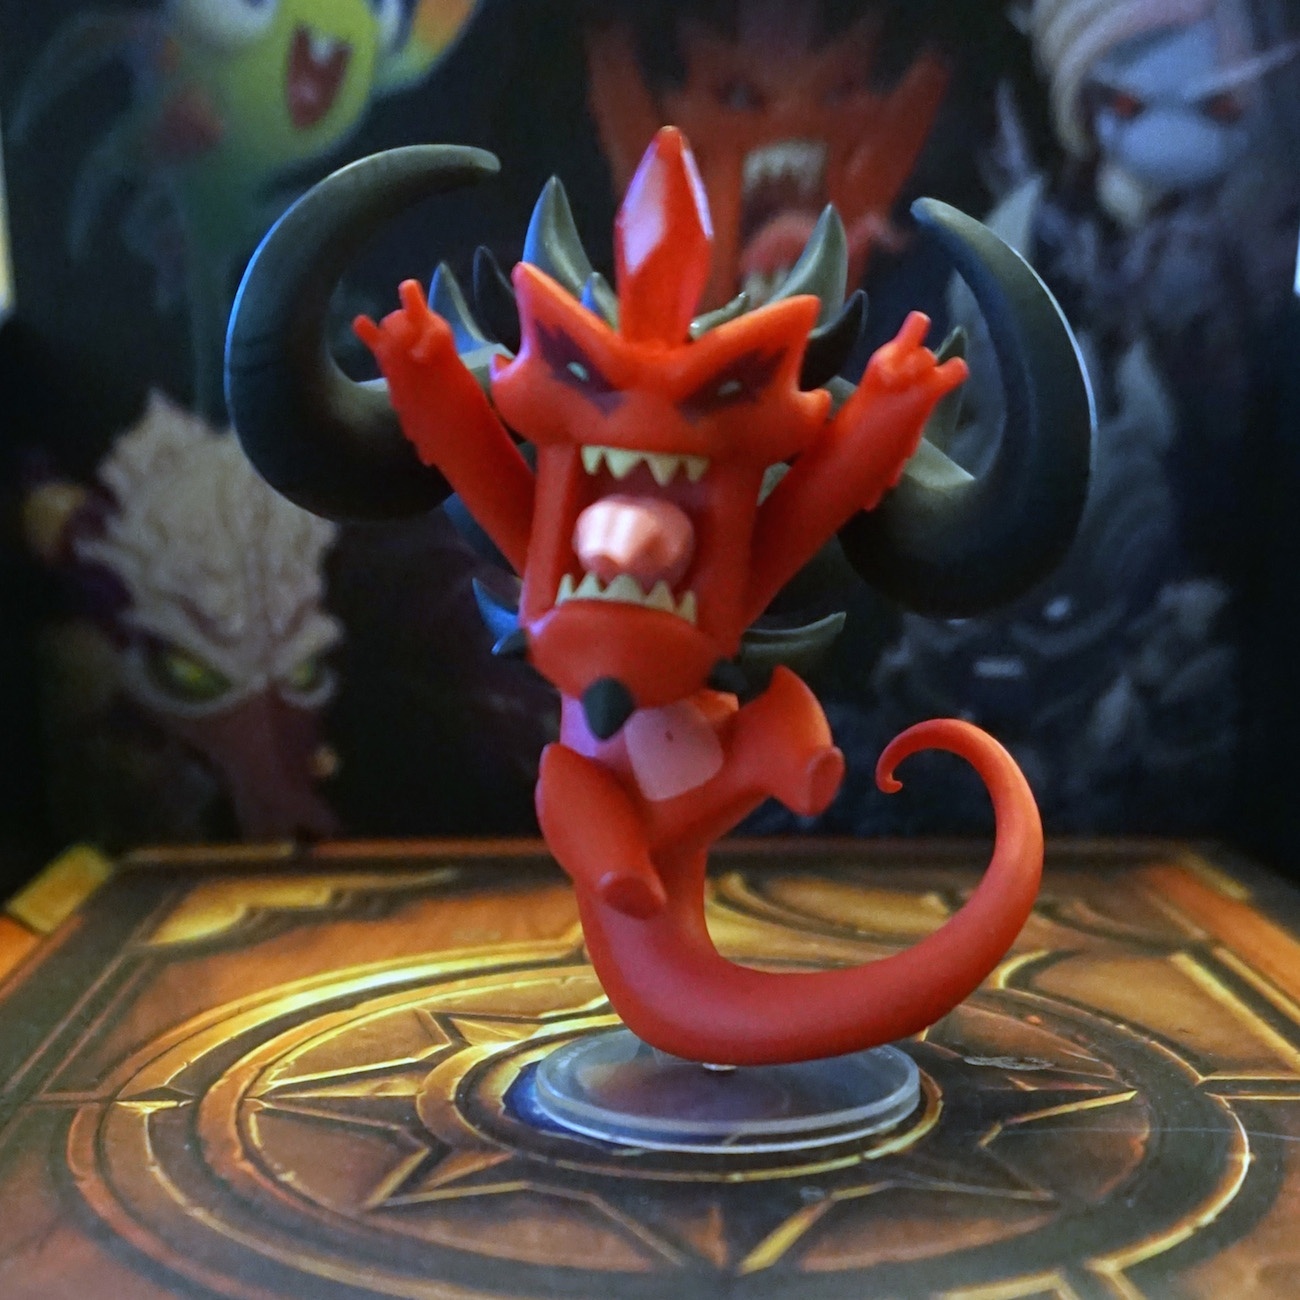 Weekly #59: Patch 6.2.3, Legion Info, Cute but Blind Vinyl Figurines on Sale - Wowhead News